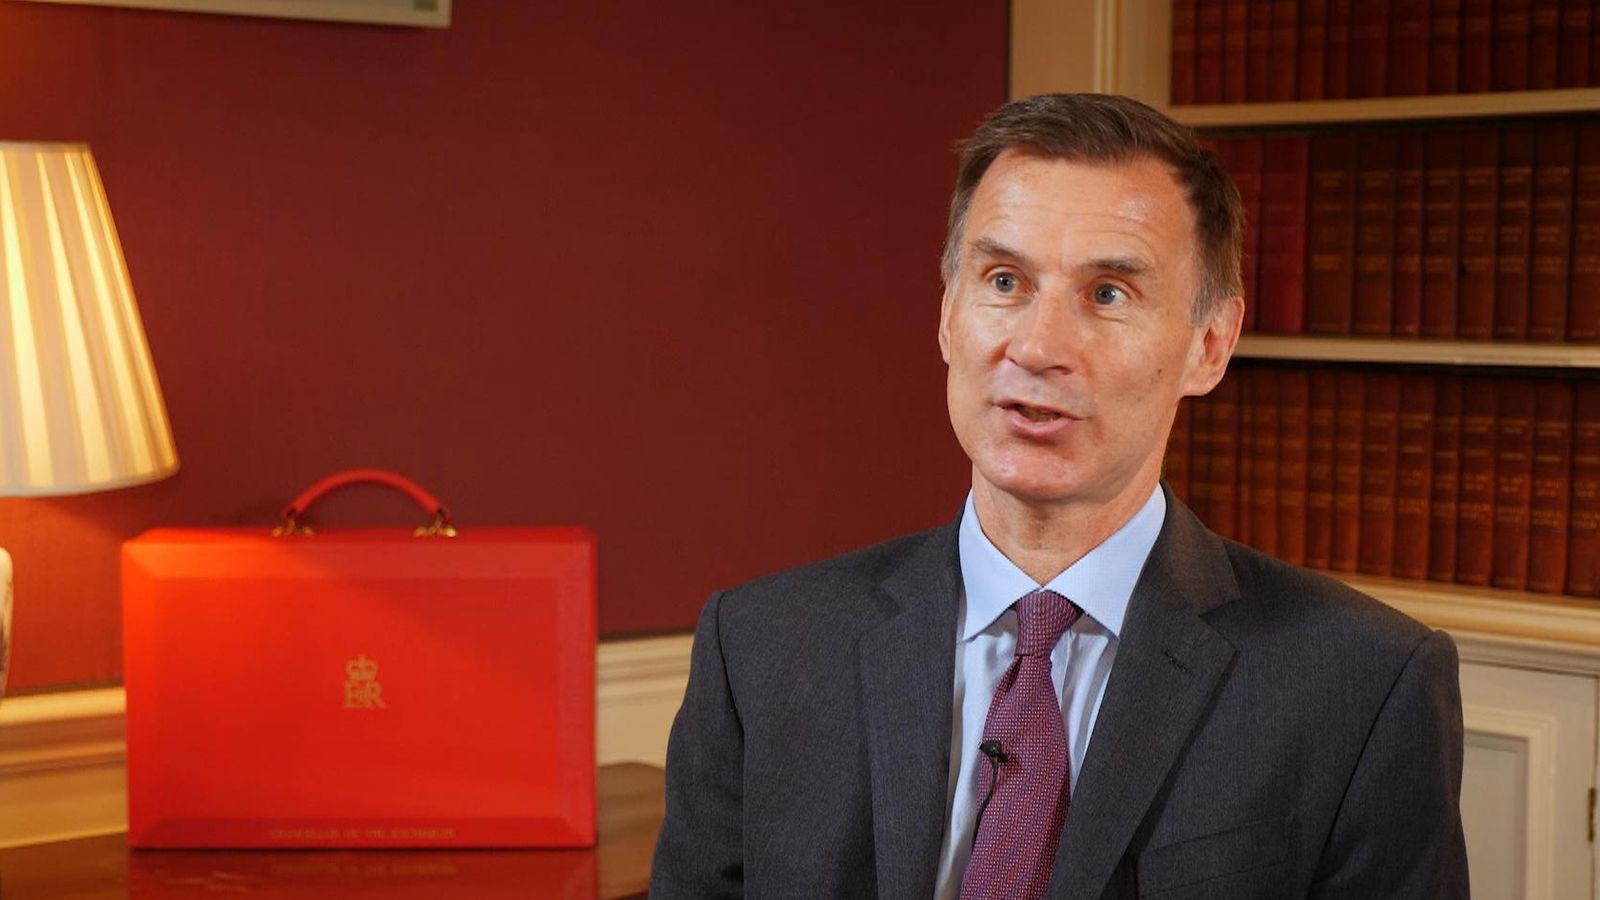 Chancellor comfortable with recession if it brings down inflation